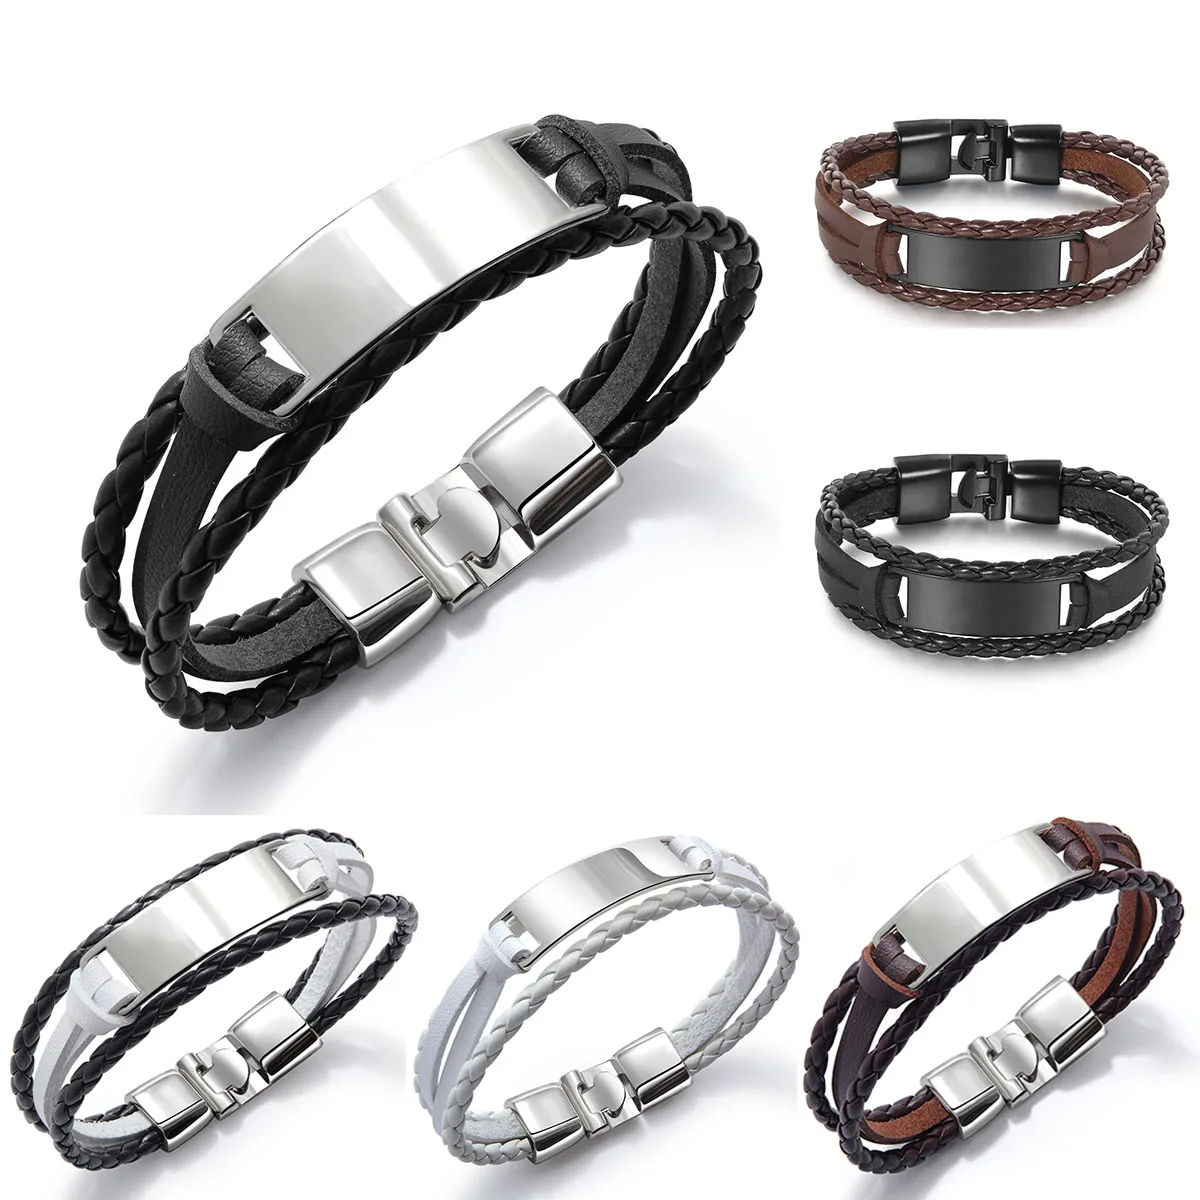 

Stainless Steel Jewelry Blank Bar Fashion Genuine Clasp Braided Rope Wrap Men's MultiLayer Charm Leather Bracelet, Picture shows